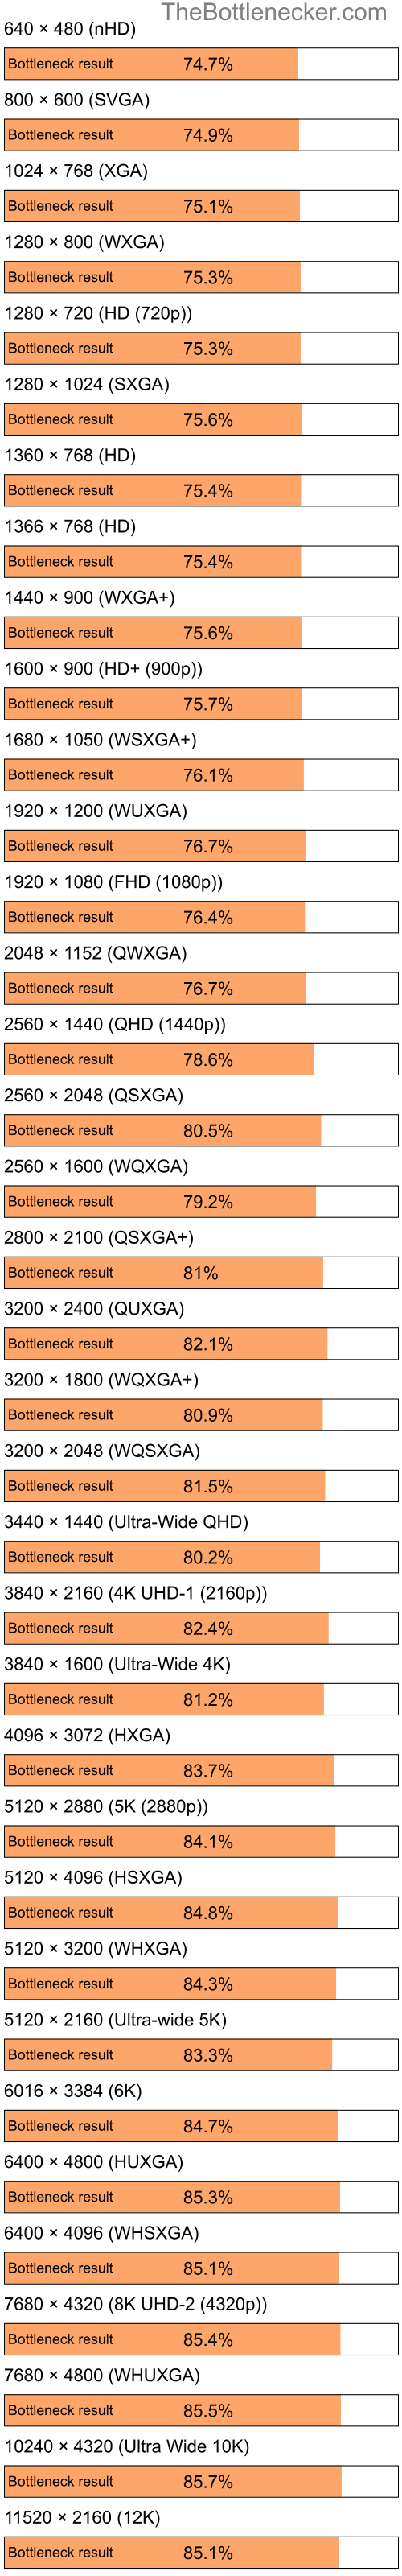 Bottleneck results by resolution for Intel Atom Z520 and AMD Mobility Radeon X1350 in General Tasks